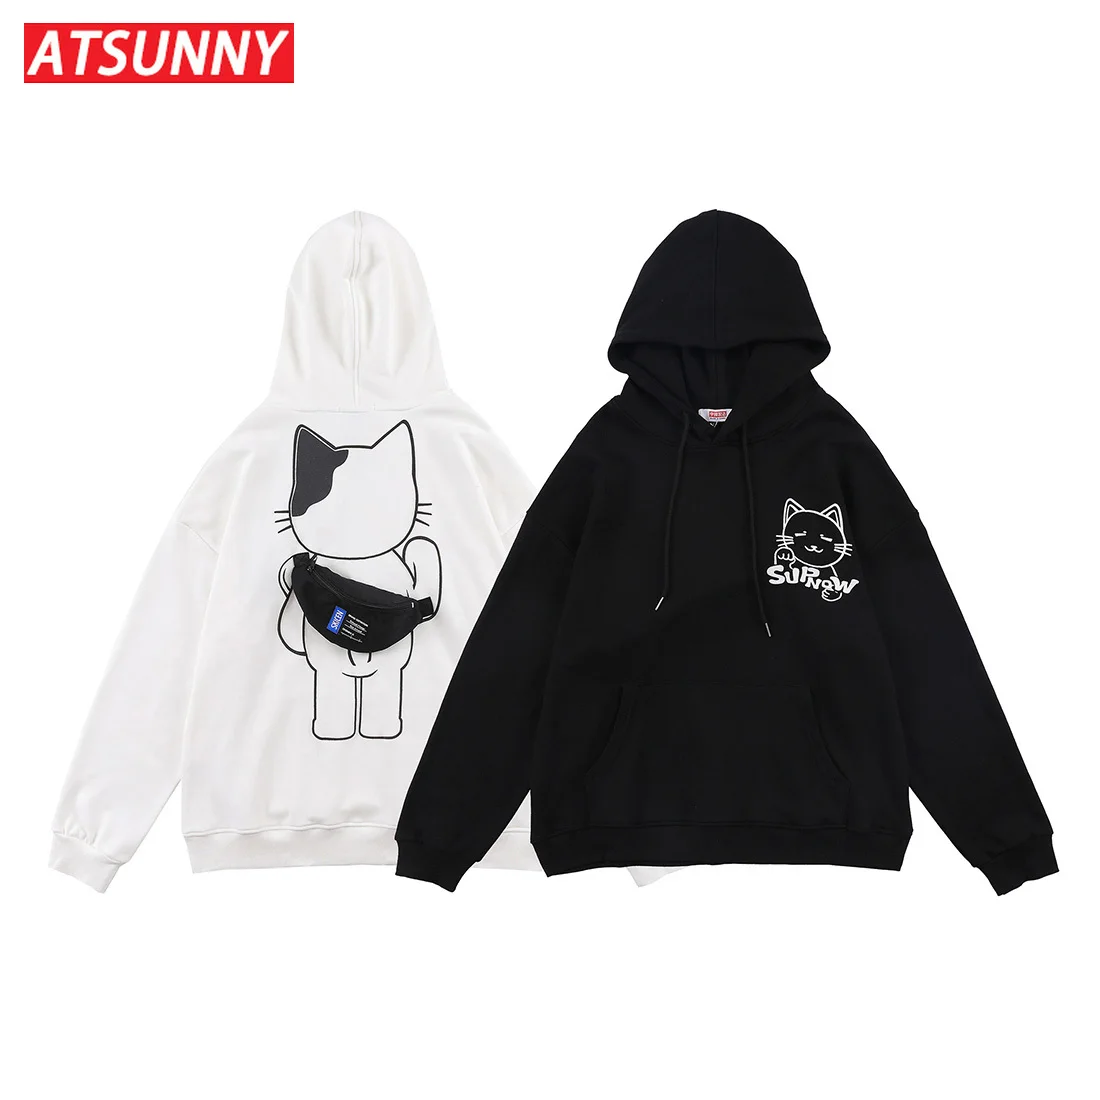 

ATSUNNY Backpack Cat Knitted Anime Hoodie Japanese Style Hip Hop Harajuku Hoodies Pullover Autumn and Winter Clothes Sweatshirt